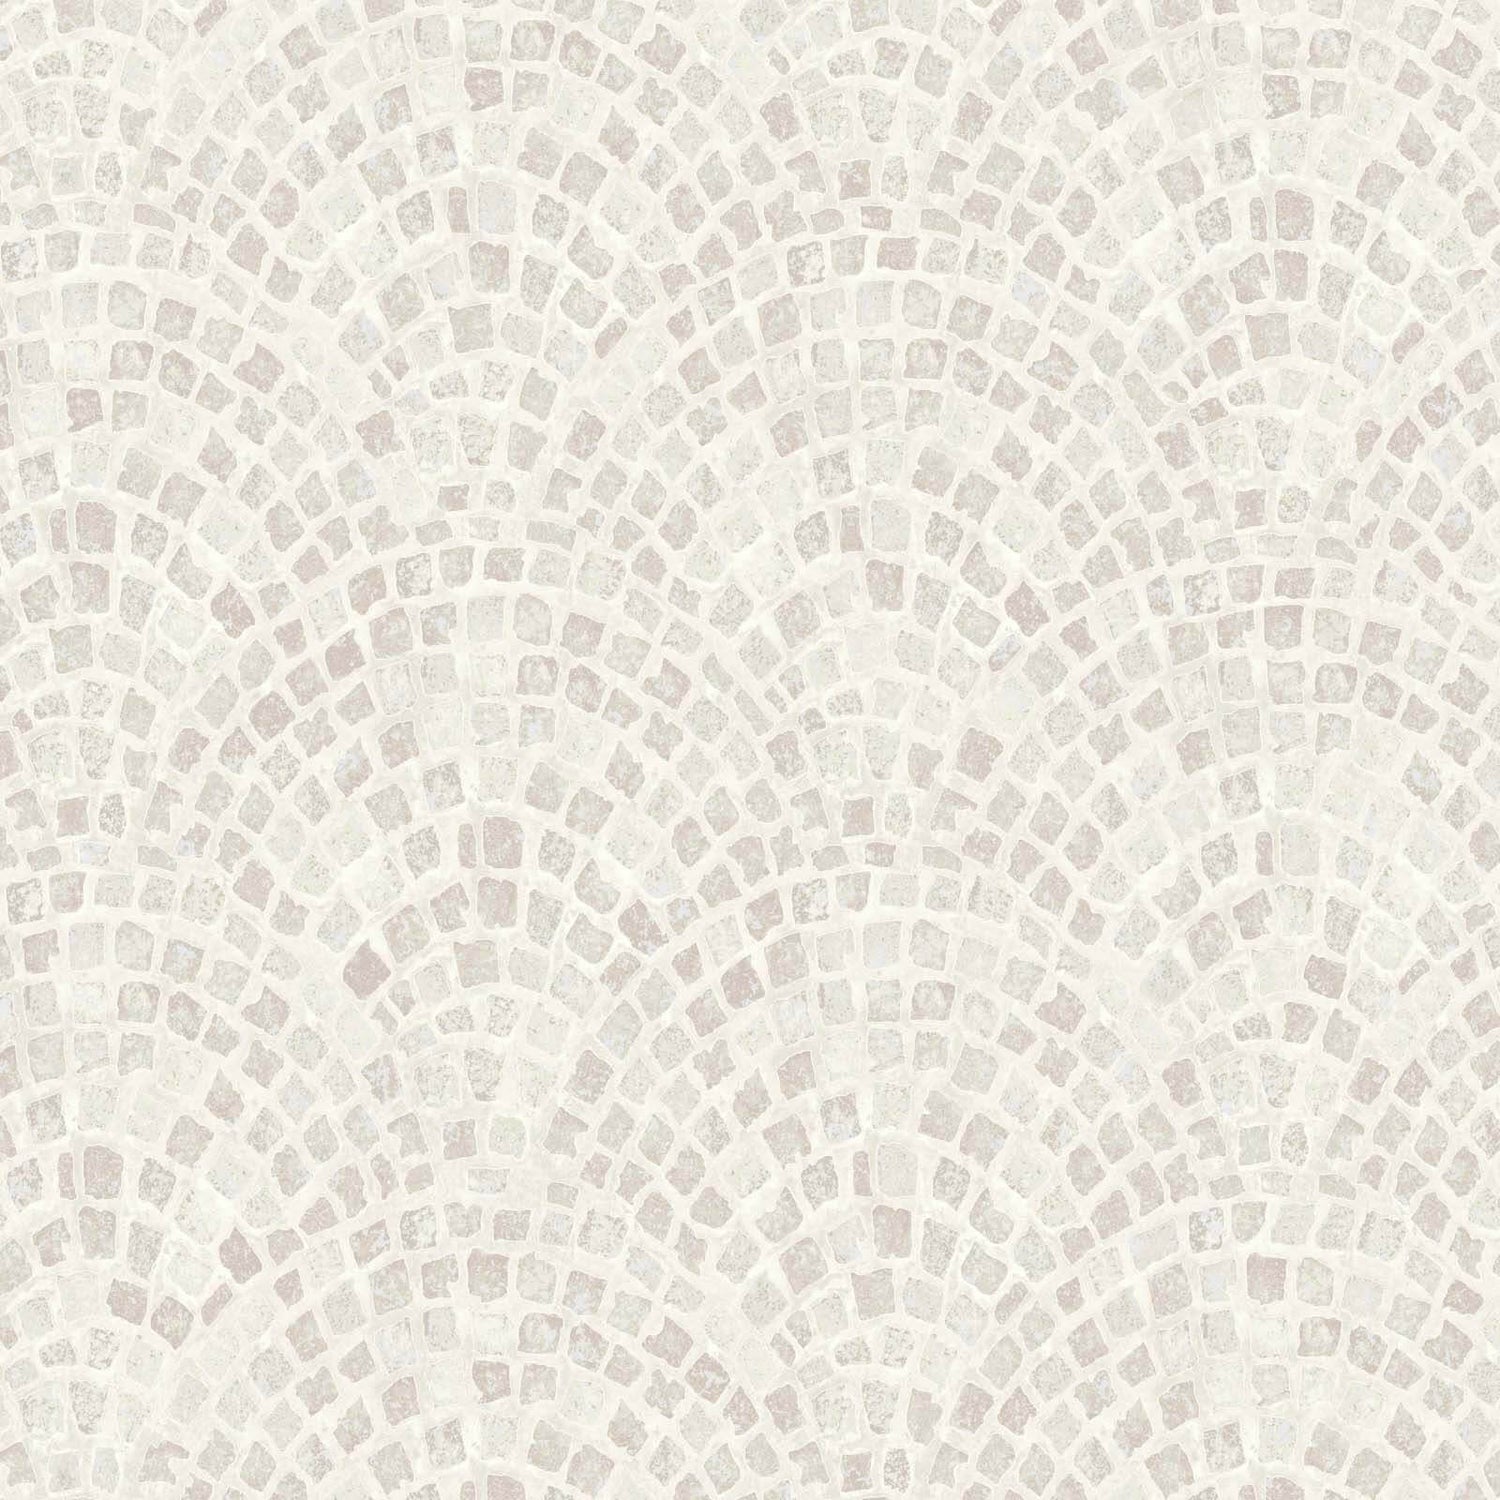 Tempaper Mosaic Tiles Grey Peel and Stick Wallpaper Covers 56 sq ft  HD598  The Home Depot